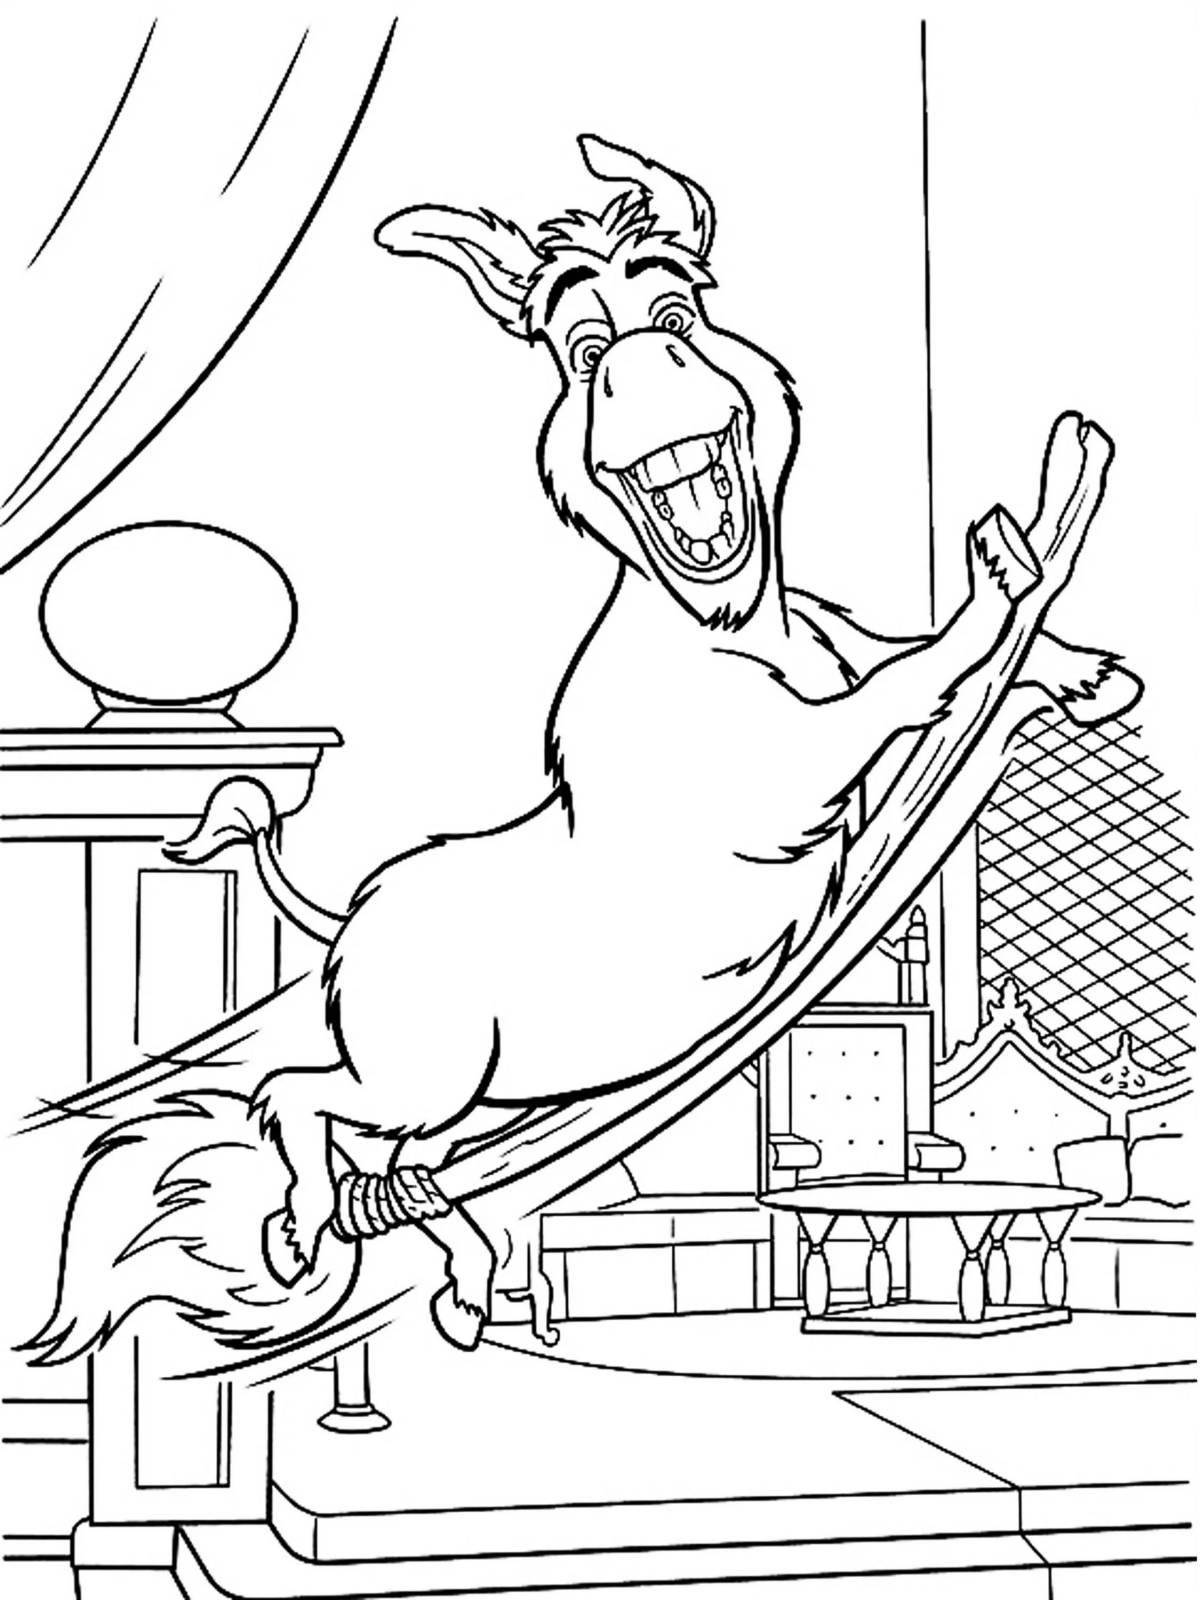 Zany coloring page ass from shrek